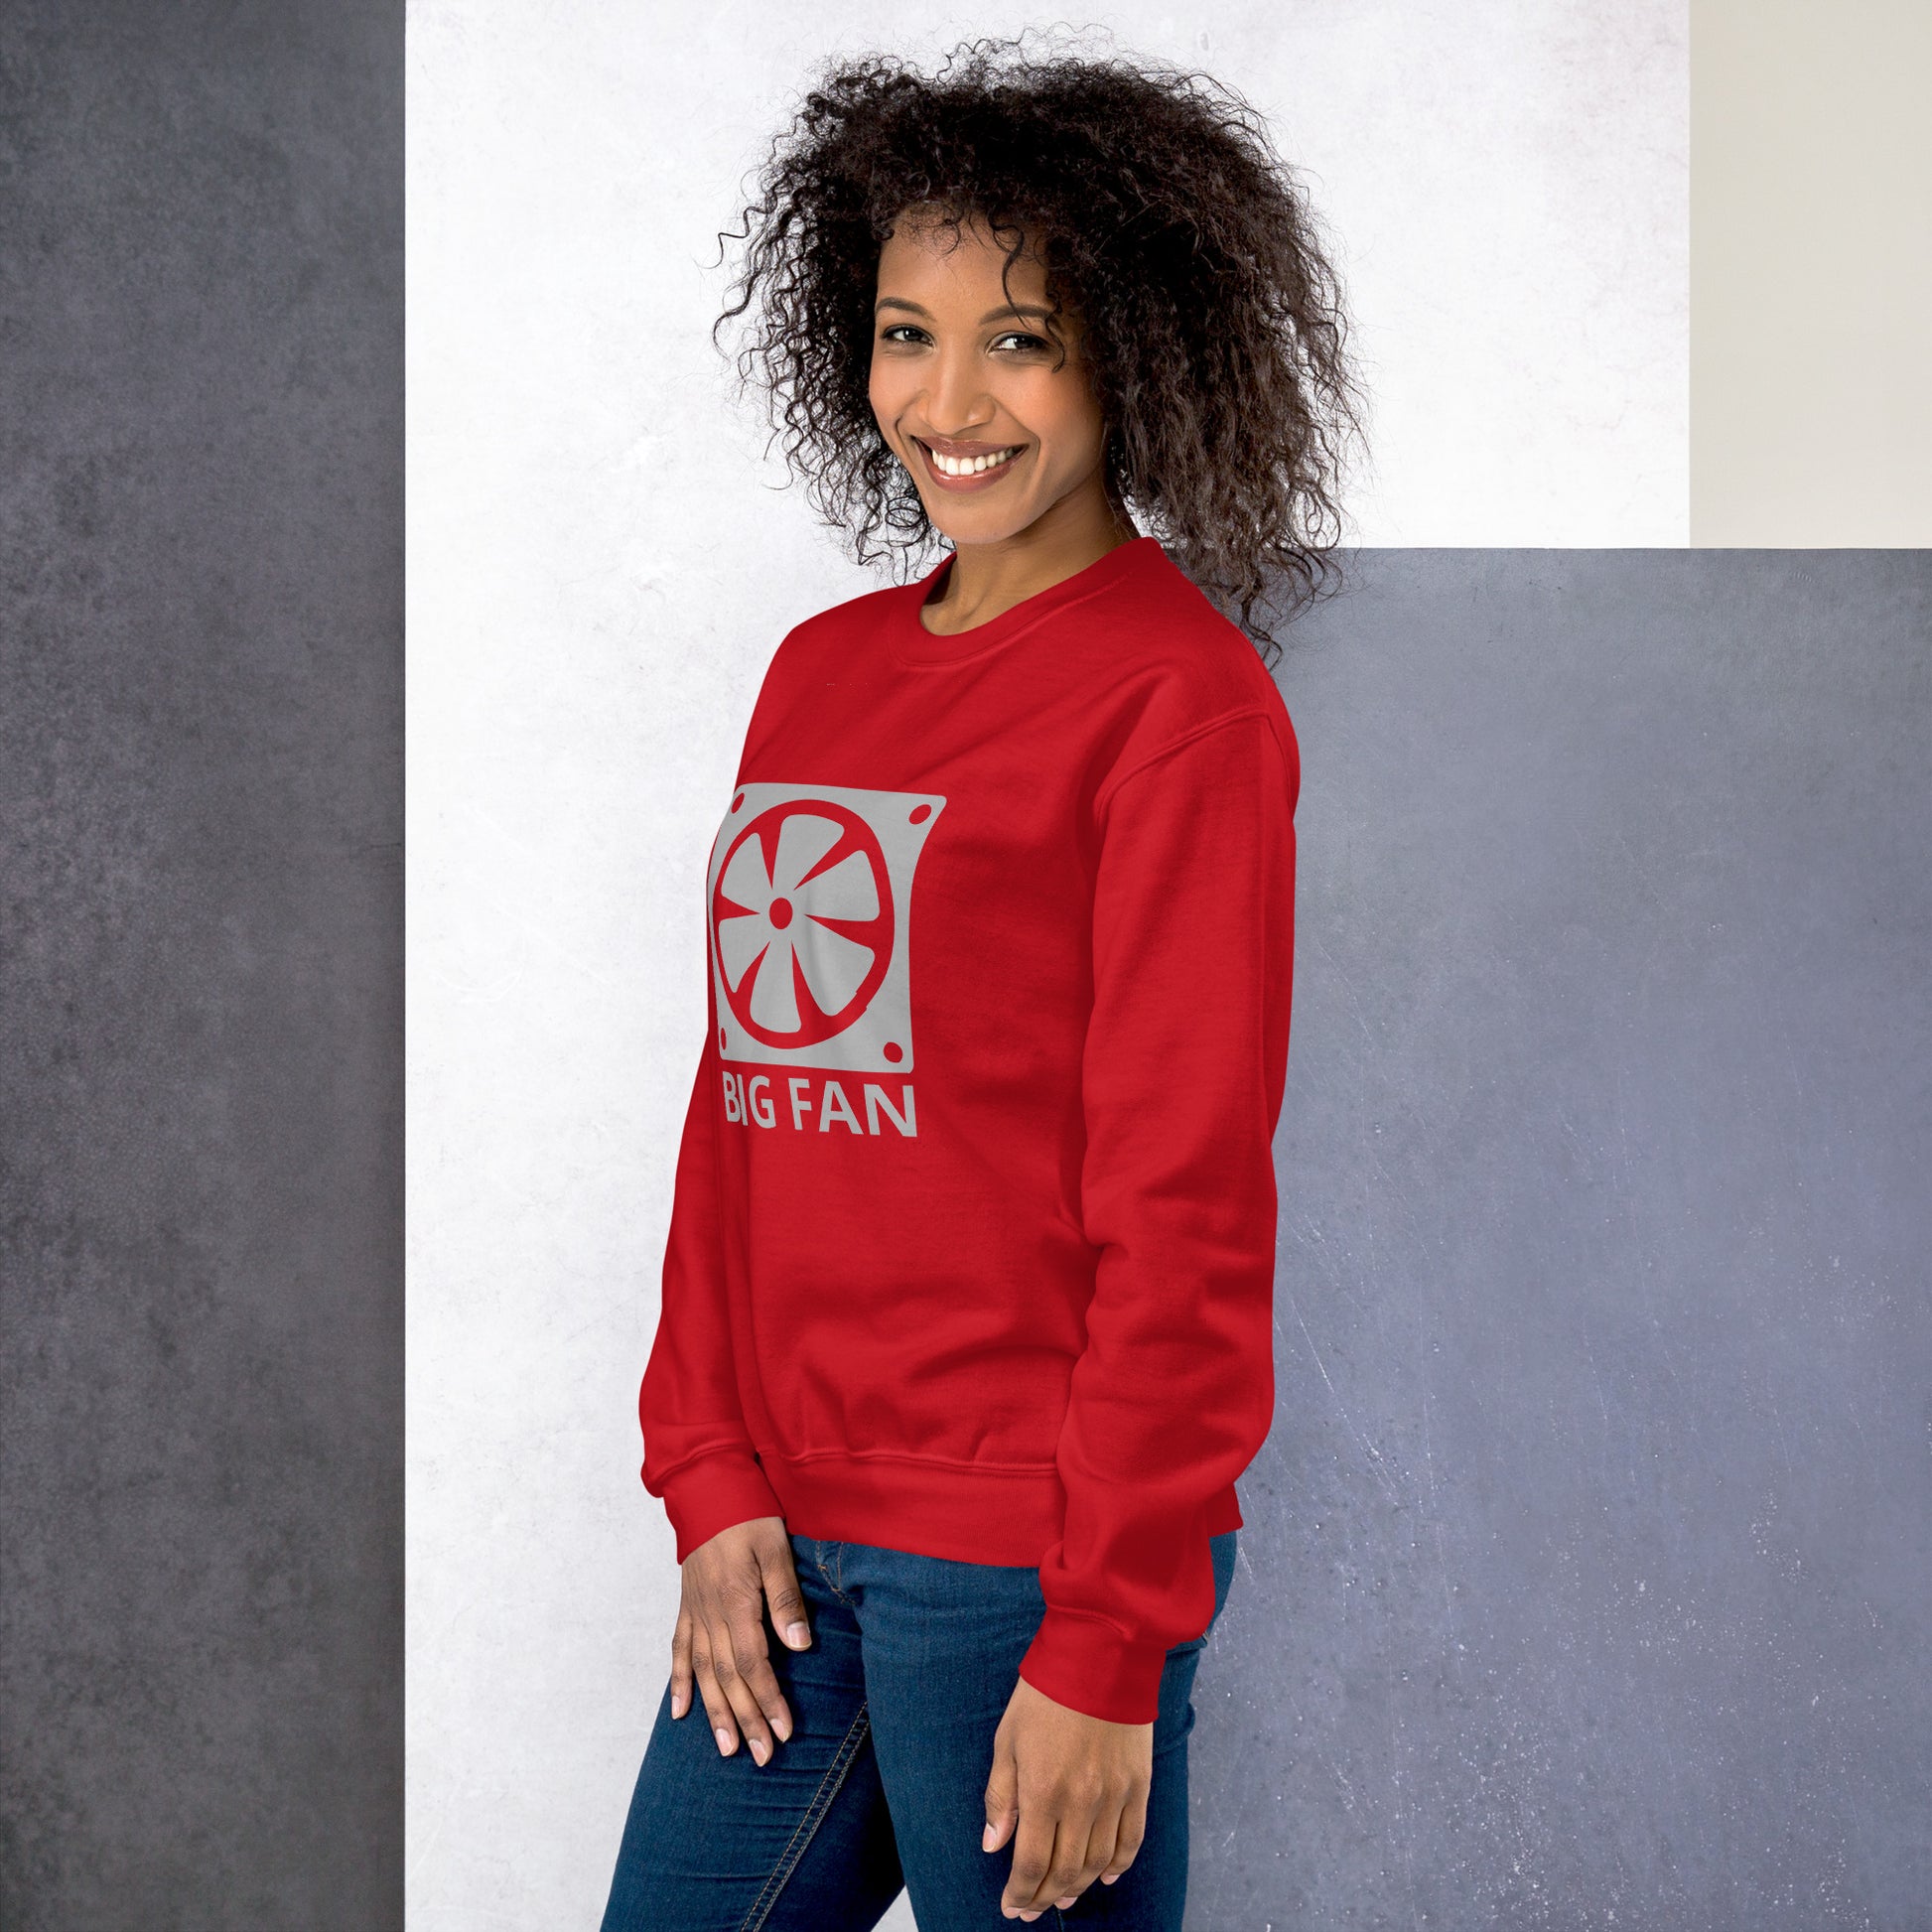 Women with red sweatshirt with image of a big computer fan and the text "BIG FAN"